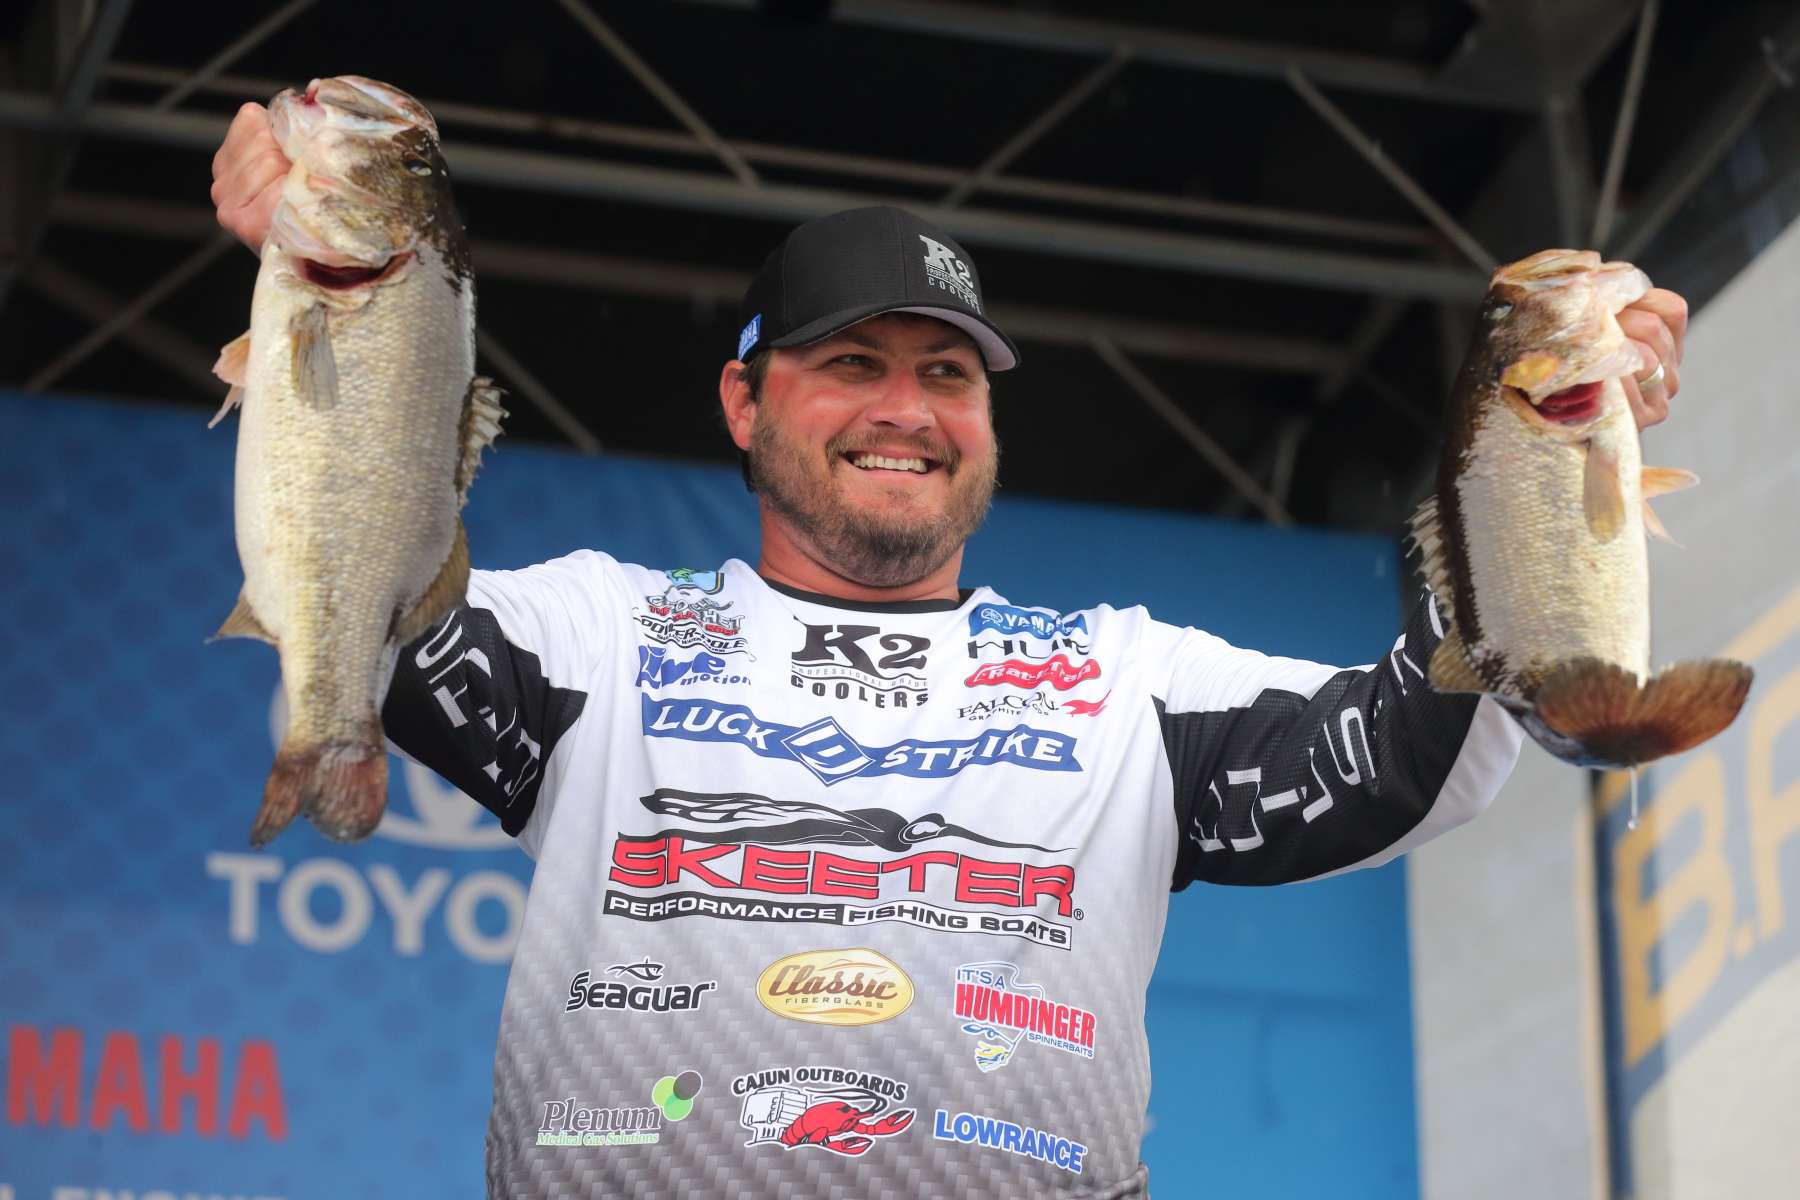 A couple lunkers helped Cliff Crochet bust the third-best bag on Day 1, 22-14, which put him third. Several anglers experienced the pitfall of St. Johns, where one great day did not lead to another. Crochet only had three fish for 6-2 on Day 2, and dropped precipitously. He finished 46th.